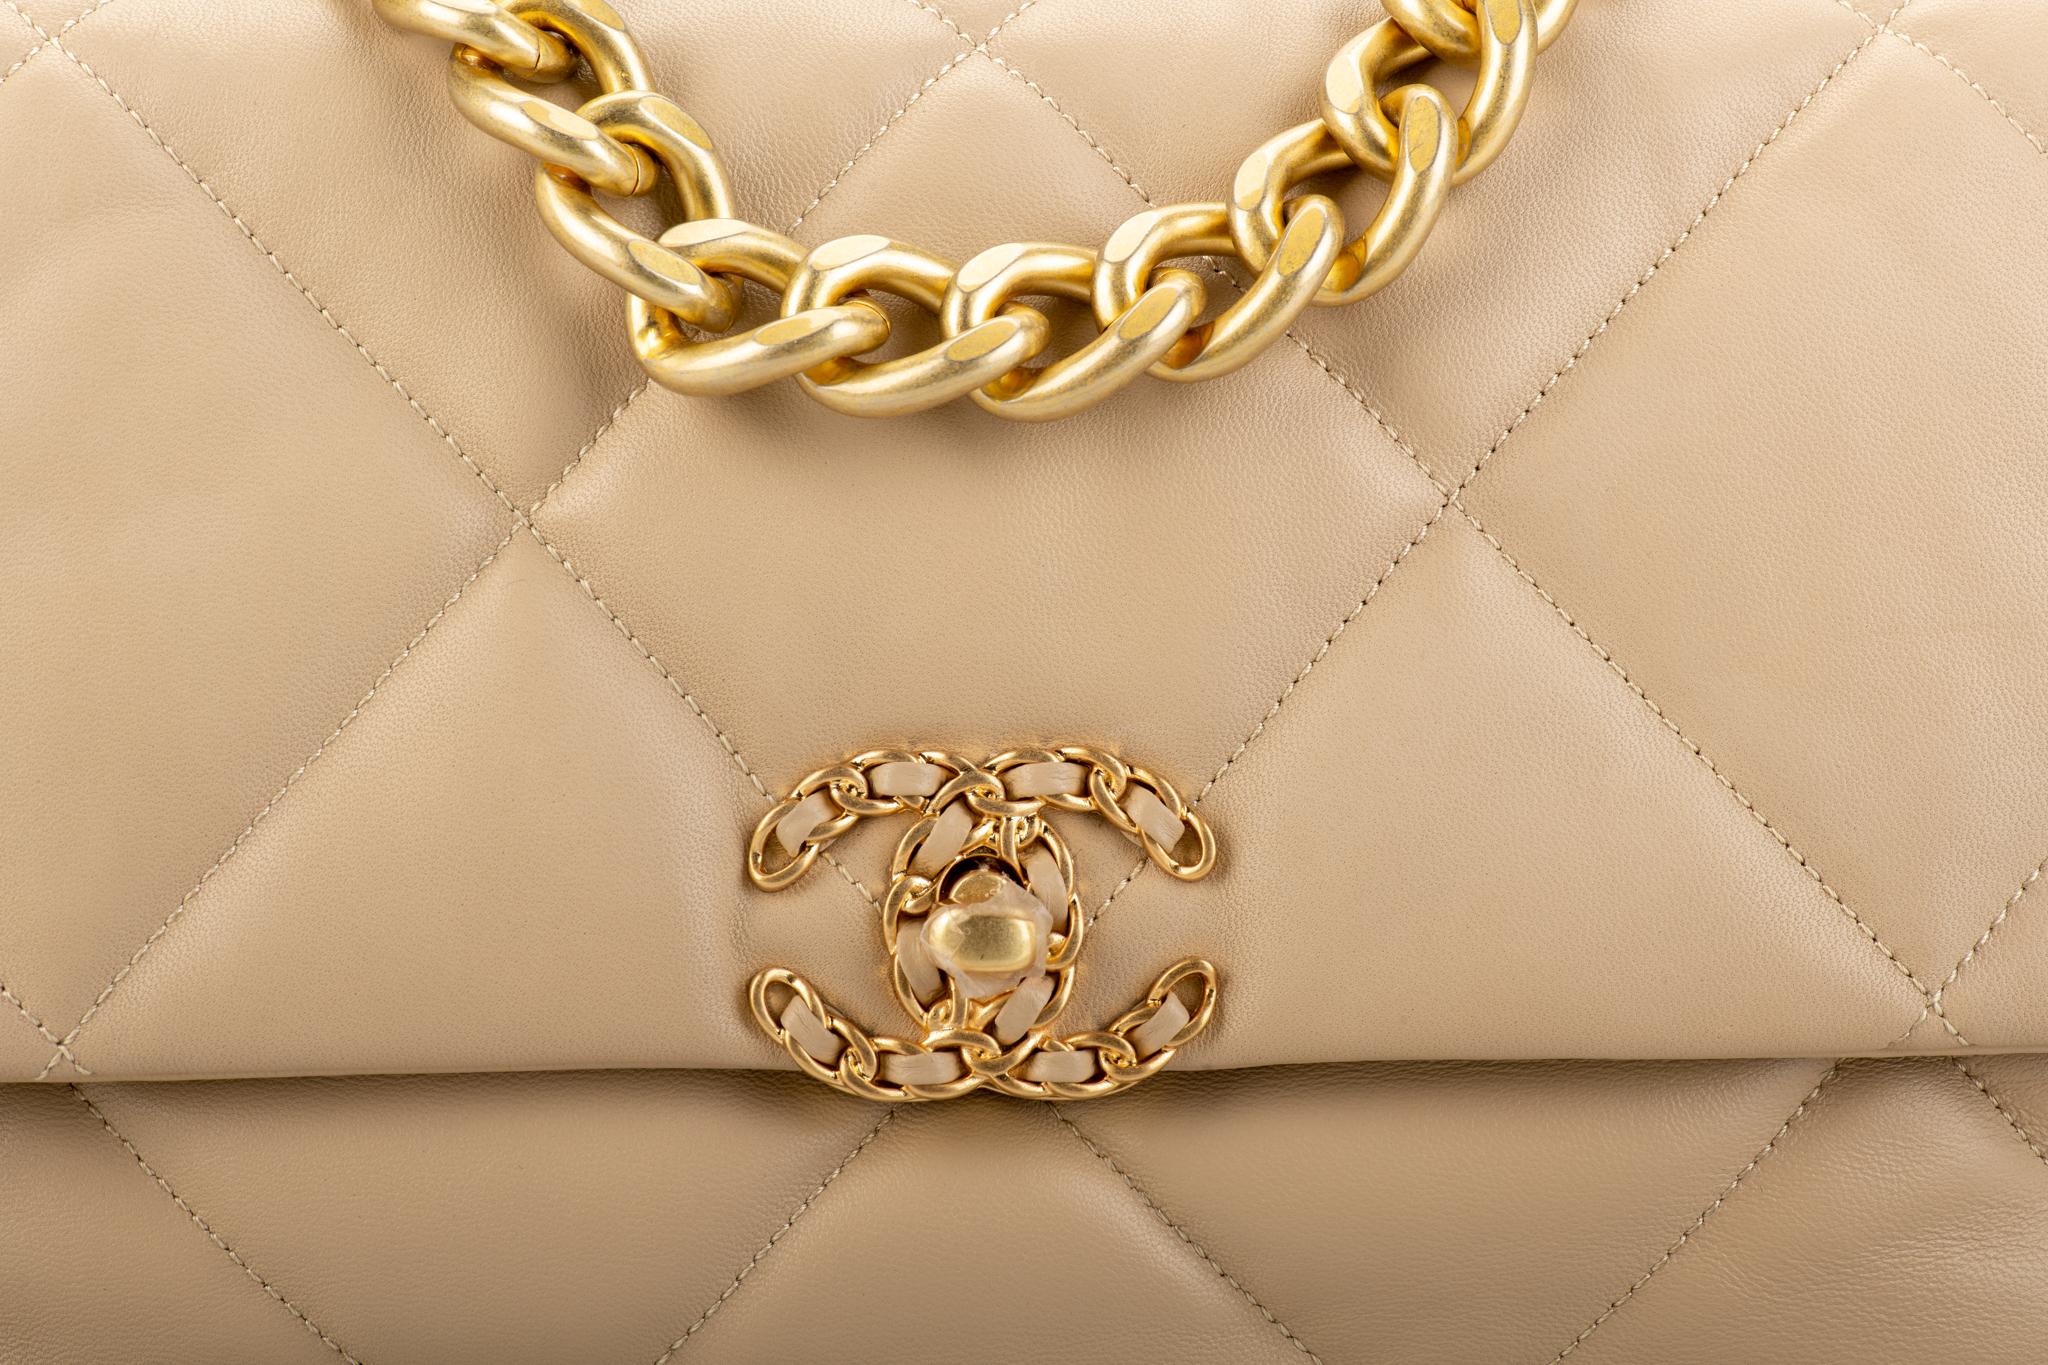 Women's New Chanel Rare Quilted Beige 19 Bag 